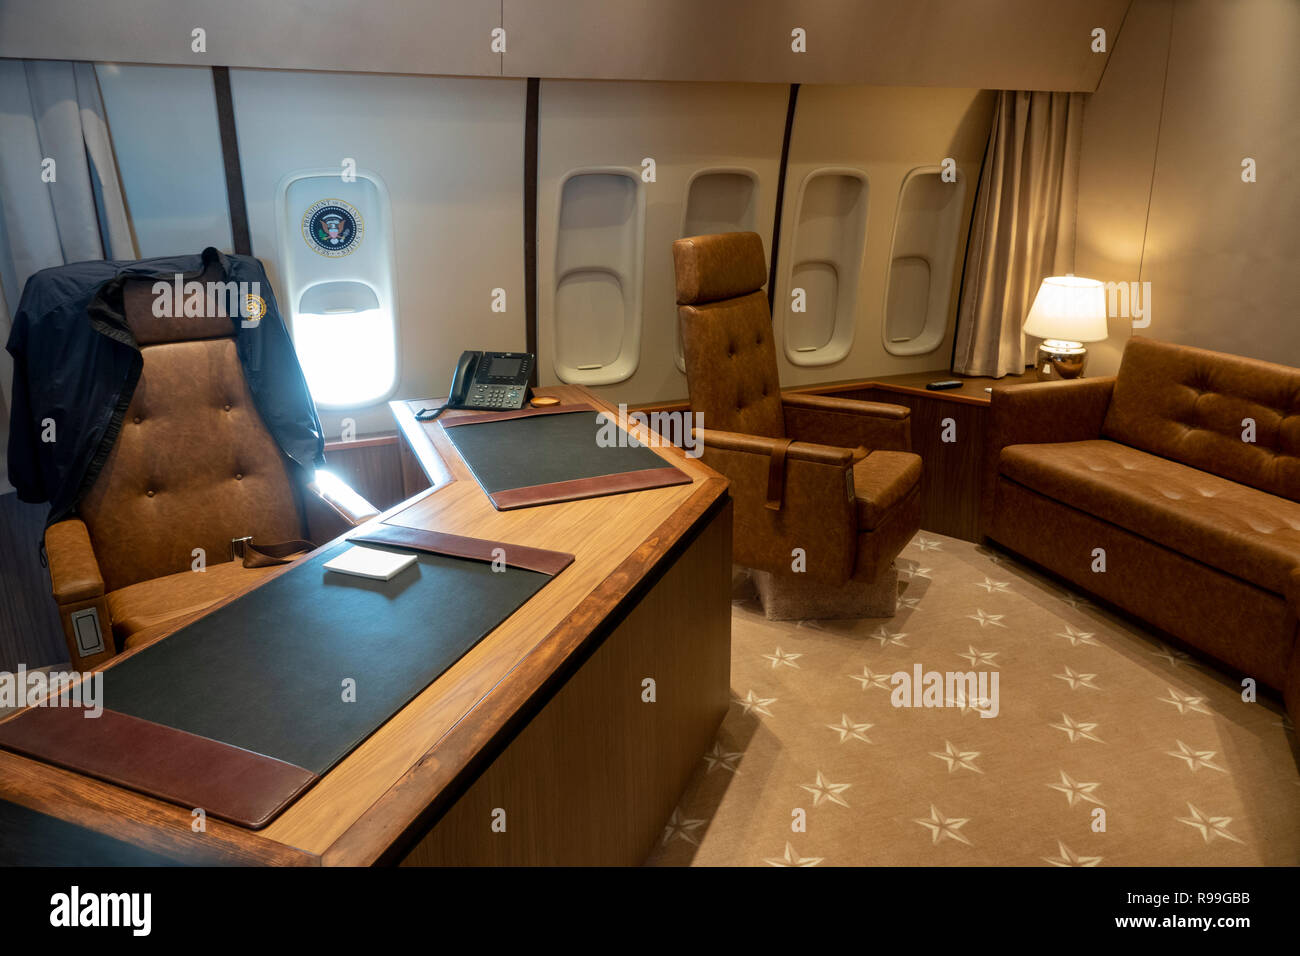 Air Force One replica mock up of the interior of the United States presidential aircraft Boeing 747 office meeting desk Stock Photo